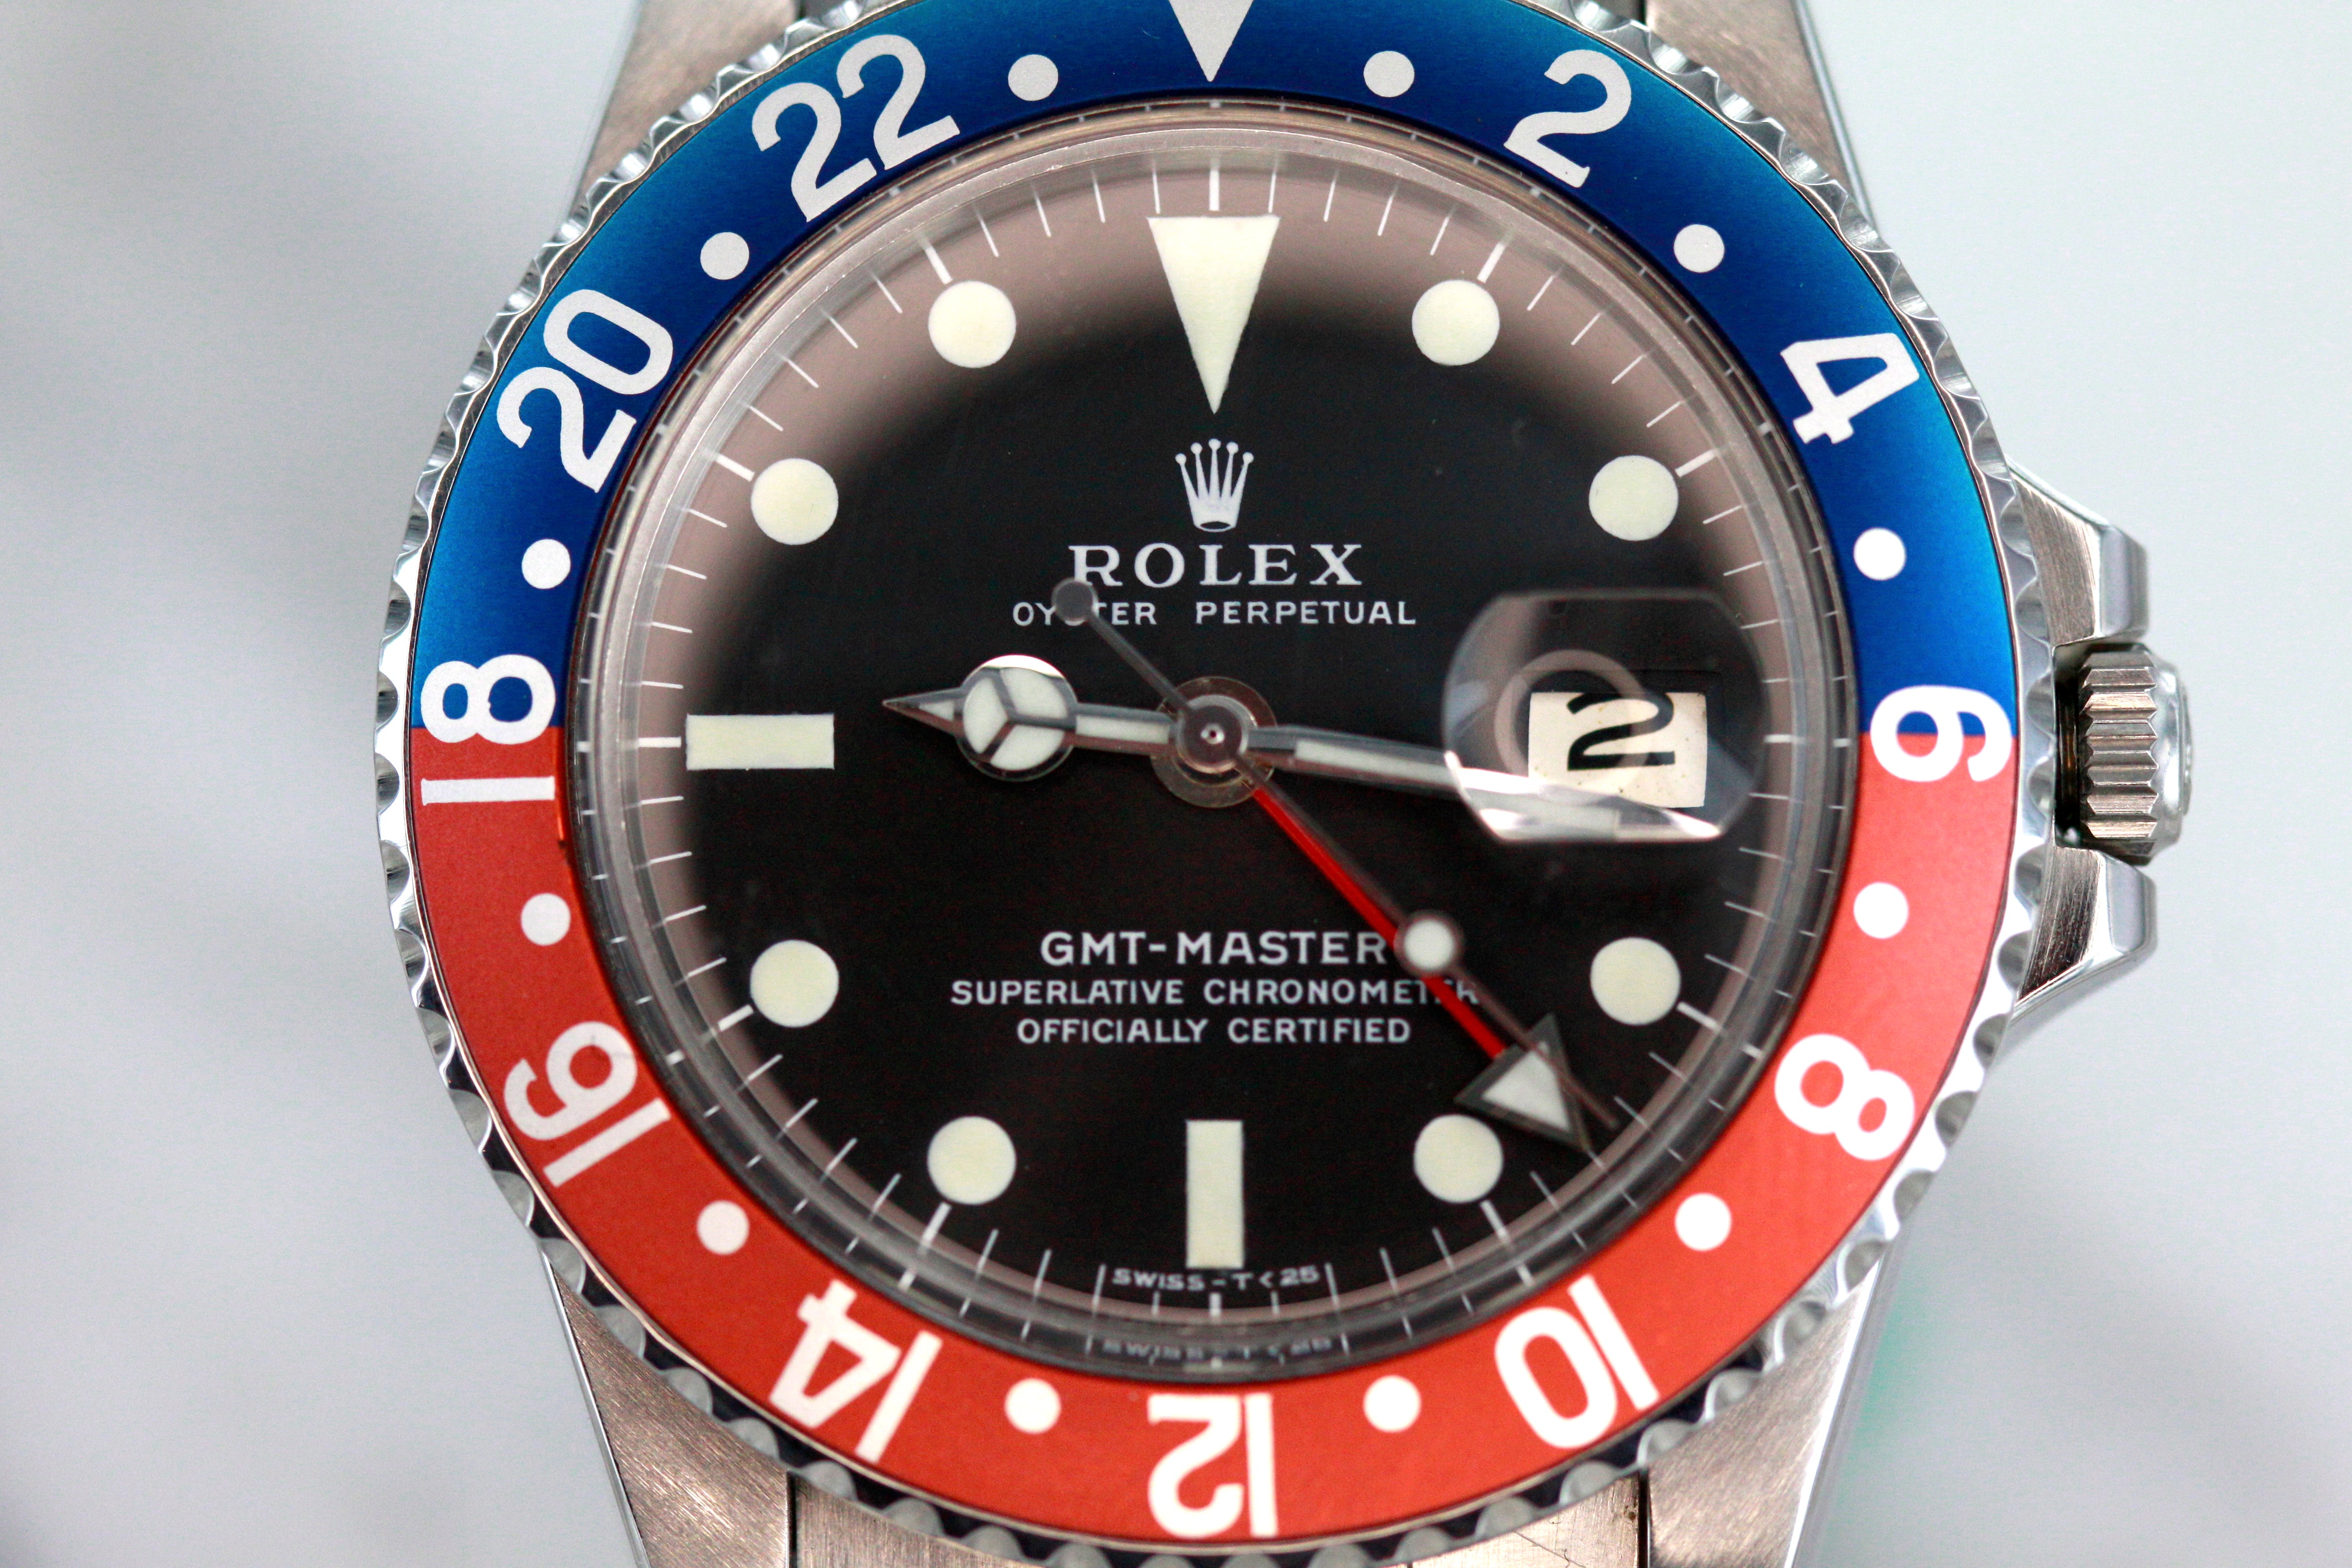 Rolex Gmt master Ref 1675 from 1972 - Mk2 Dial